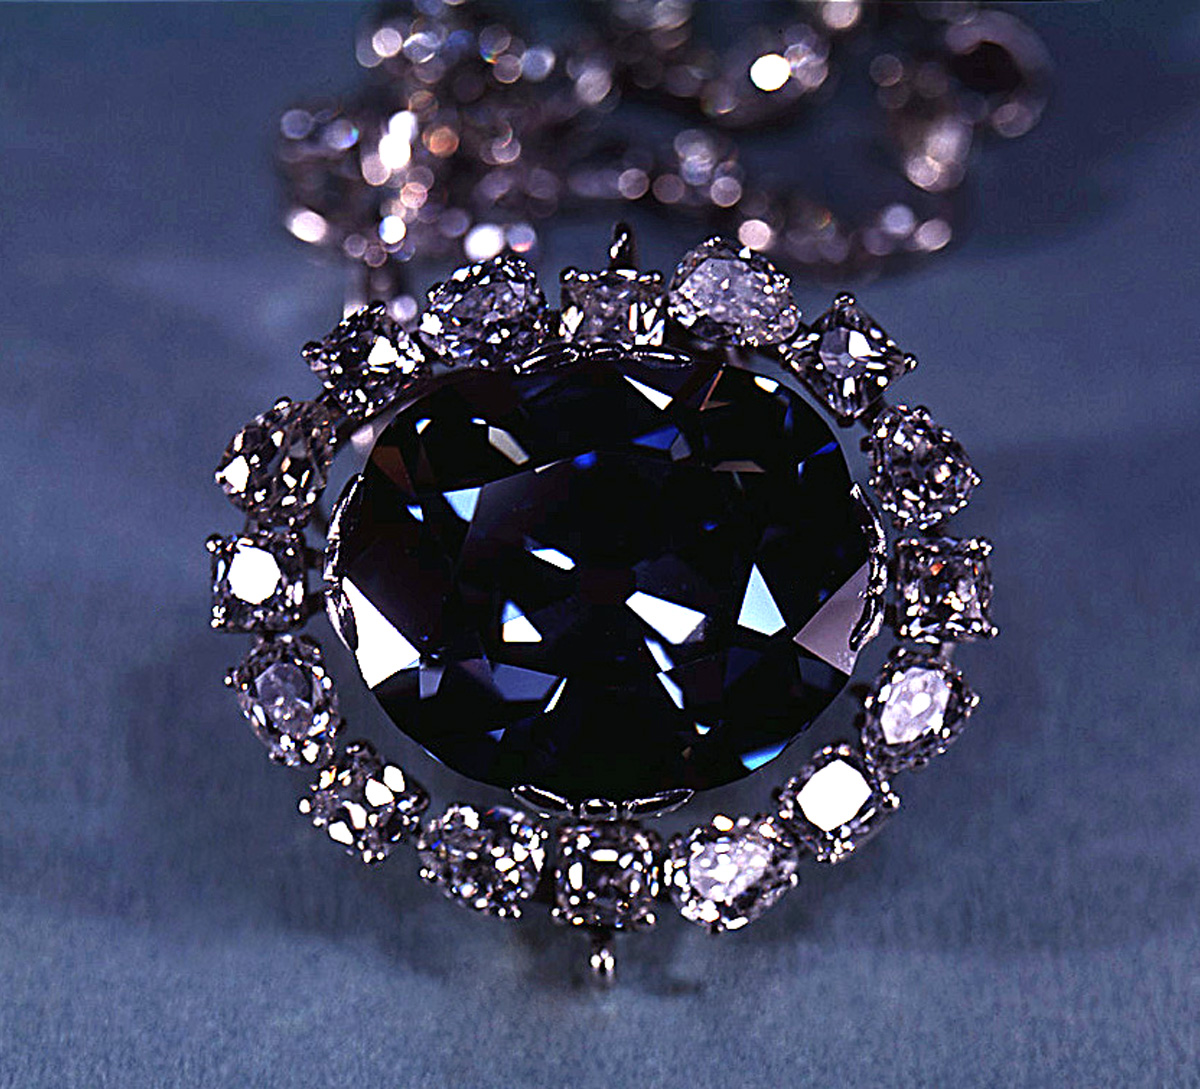 1792: Theft of the Most Famous Diamond in the World